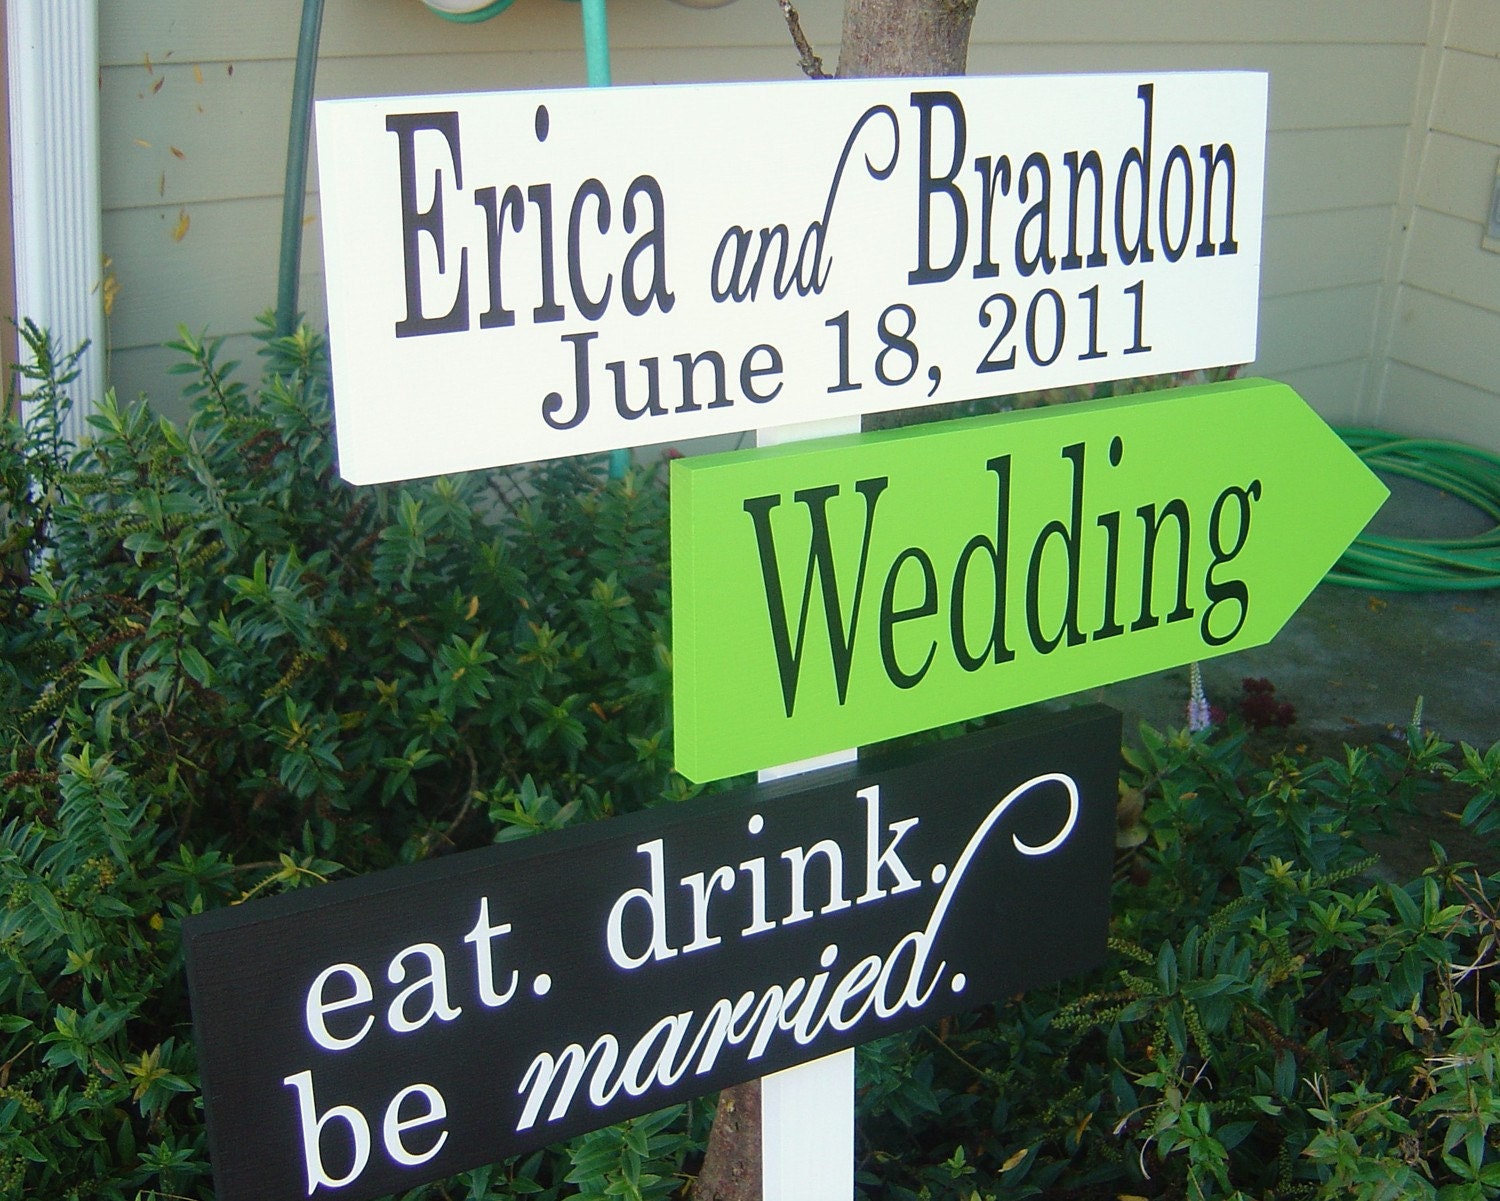 Wedding Directional Arrow Sign. Custom Wedding, Ceremony and Reception sign and arrow, 6 in. X 18 in. for personalized rectangle sign and 6 in. X 17 in for the arrow. We have over 300 wedding signs in our shop.